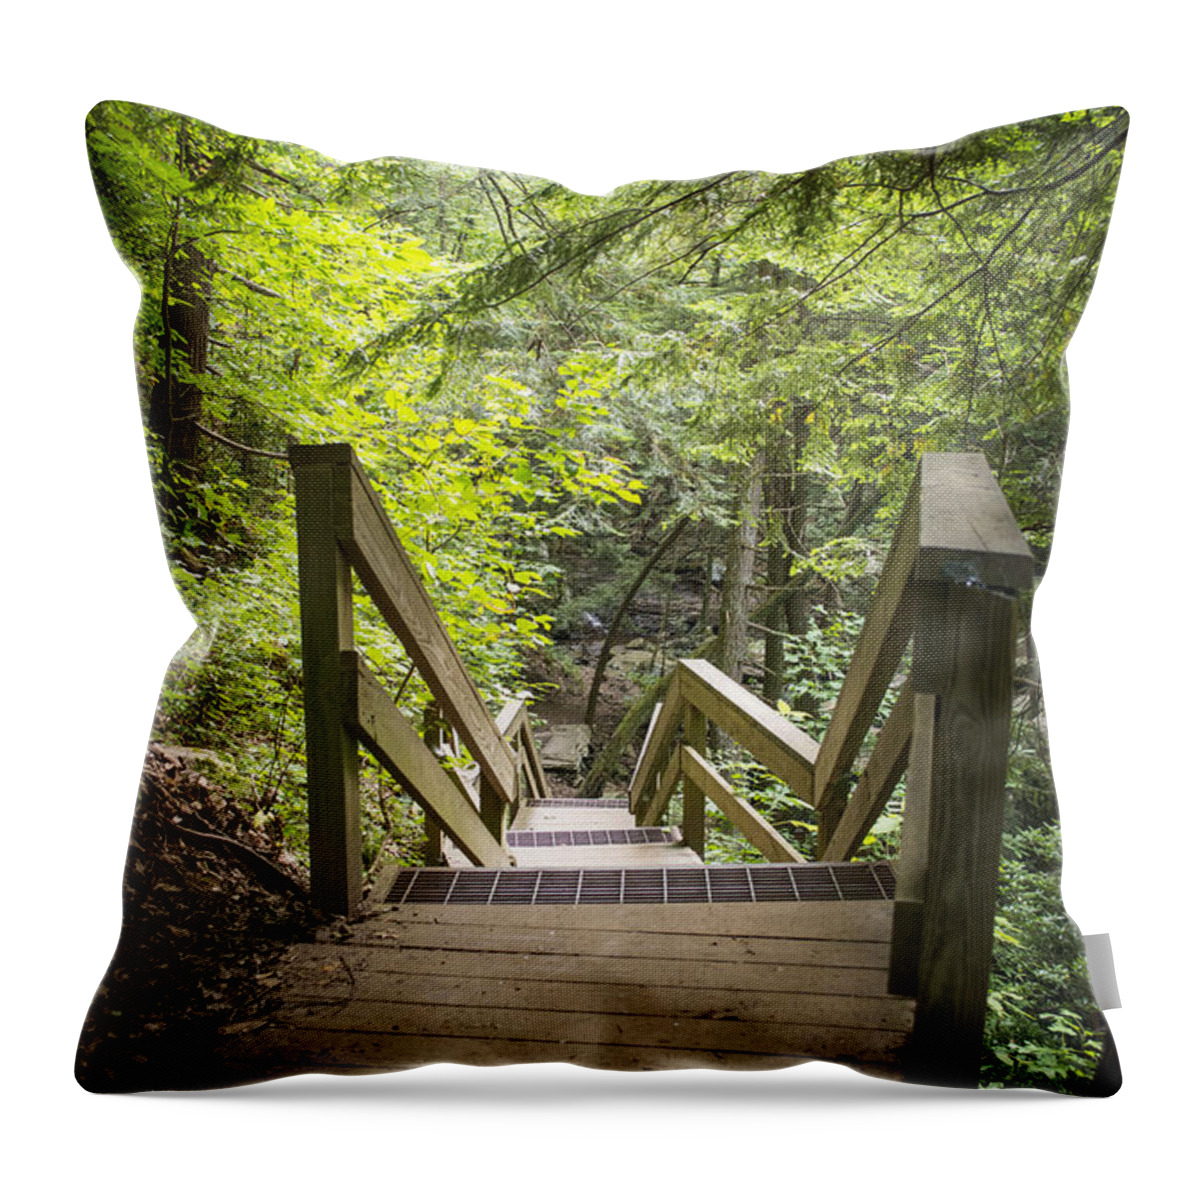 Chita Hunter Throw Pillow featuring the photograph Descend by Chita Hunter